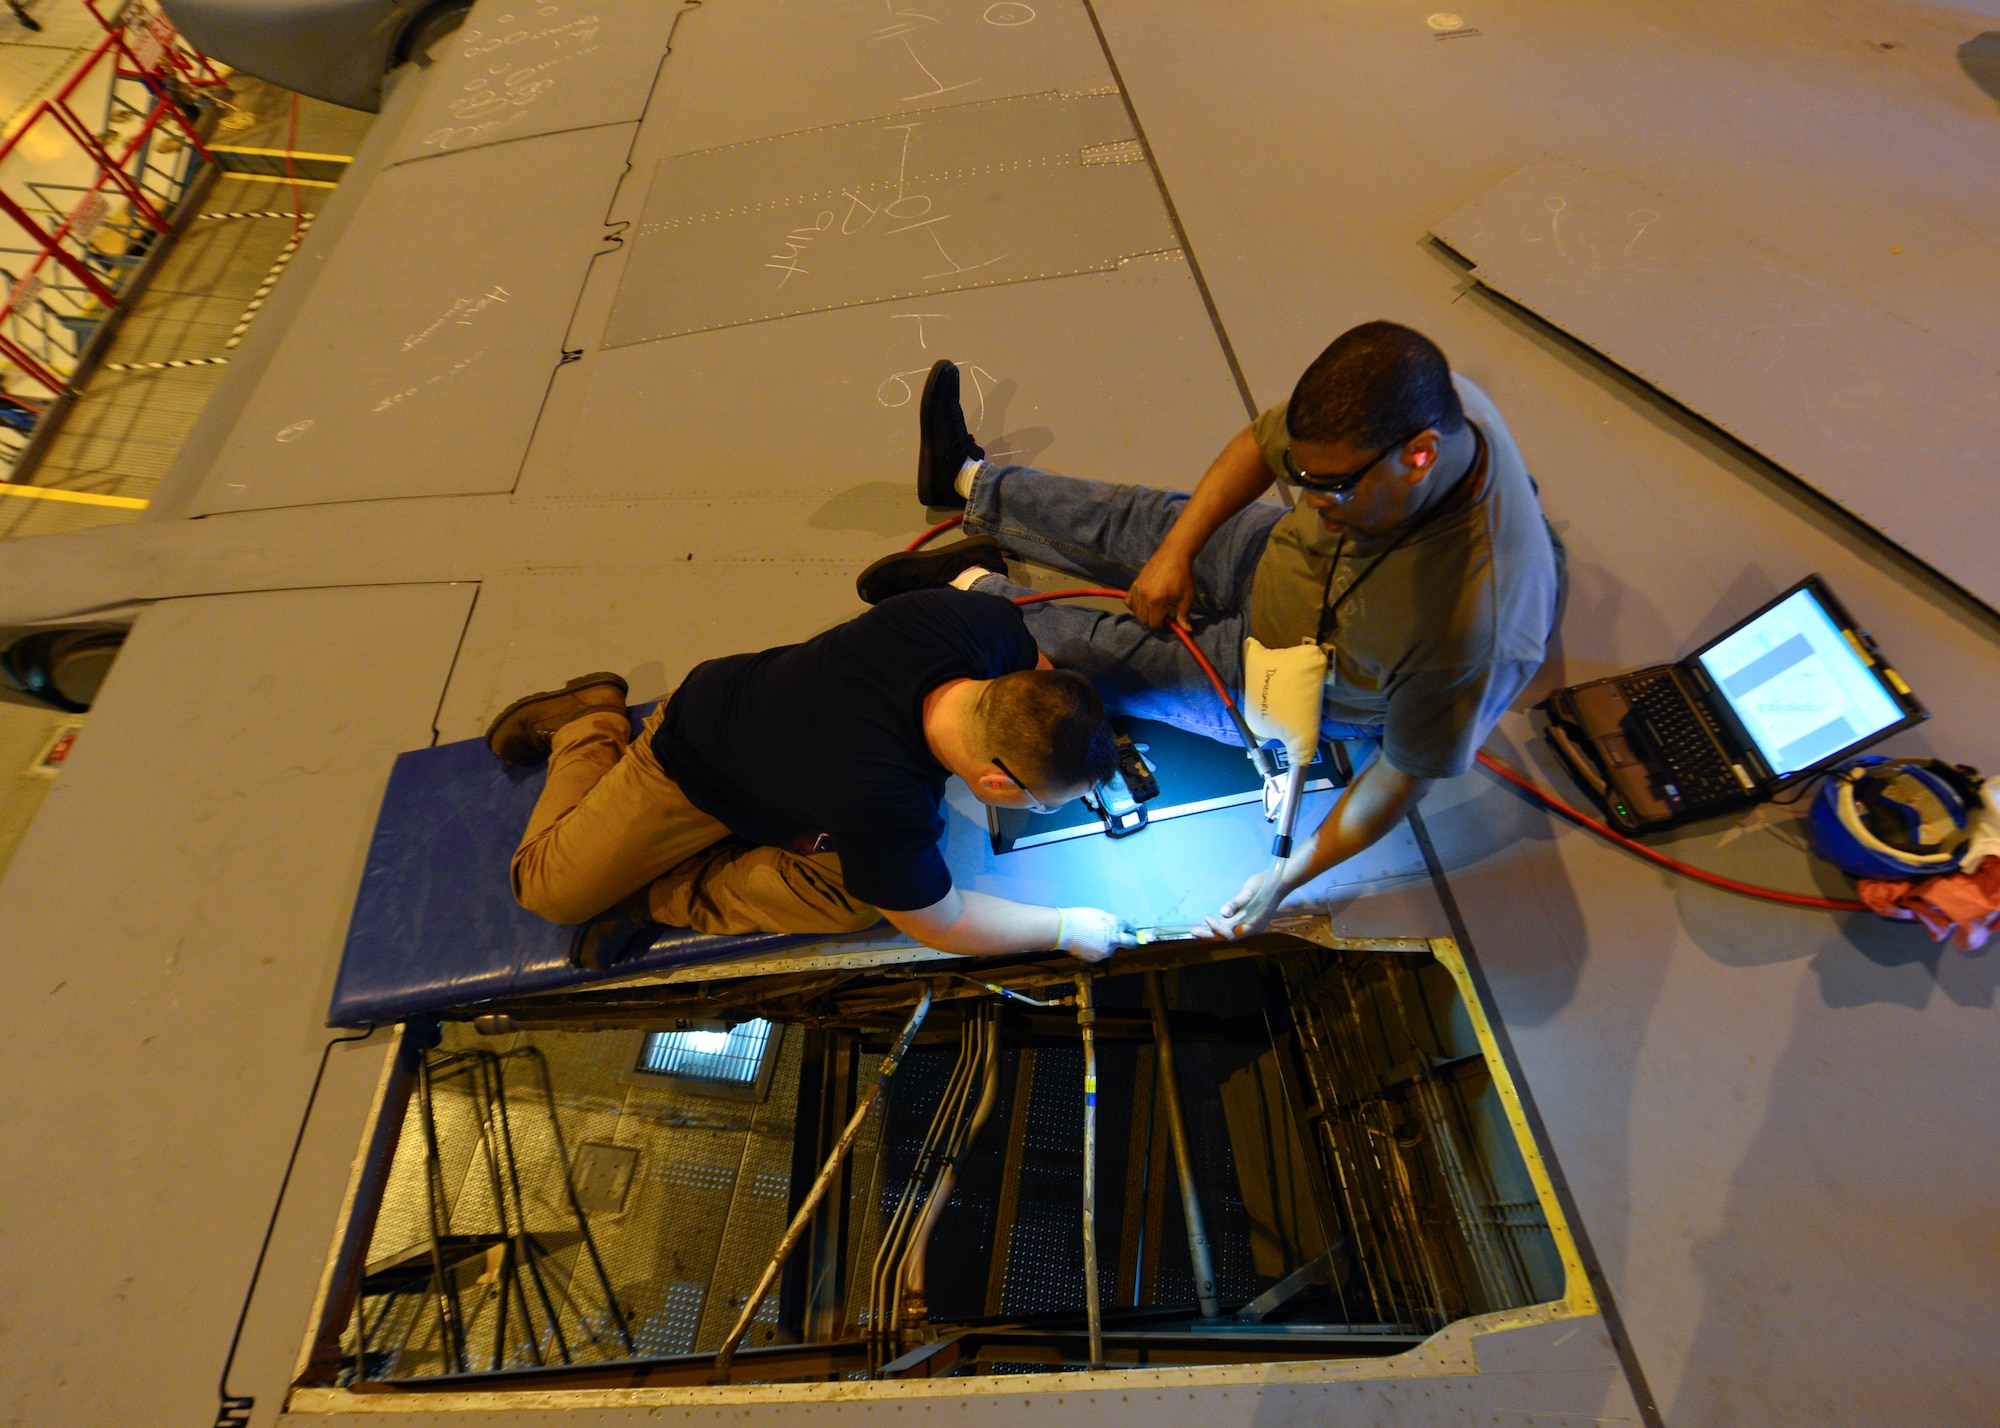 Mike Kuberski, left, and John Luke, right, both 436th Maintenance Squadron sheet metal mechanics, scrape sealant off of a trailing edge panel from a C-5M Super Galaxy wing during a Maintenance Steering Group-3 Major inspection Dec. 2, 2015, in the isochronal dock at Dover Air Force Base, Del. The new panel was installed and resealed during the inspection. (U.S. Air Force photo/Senior Airman William Johnson)